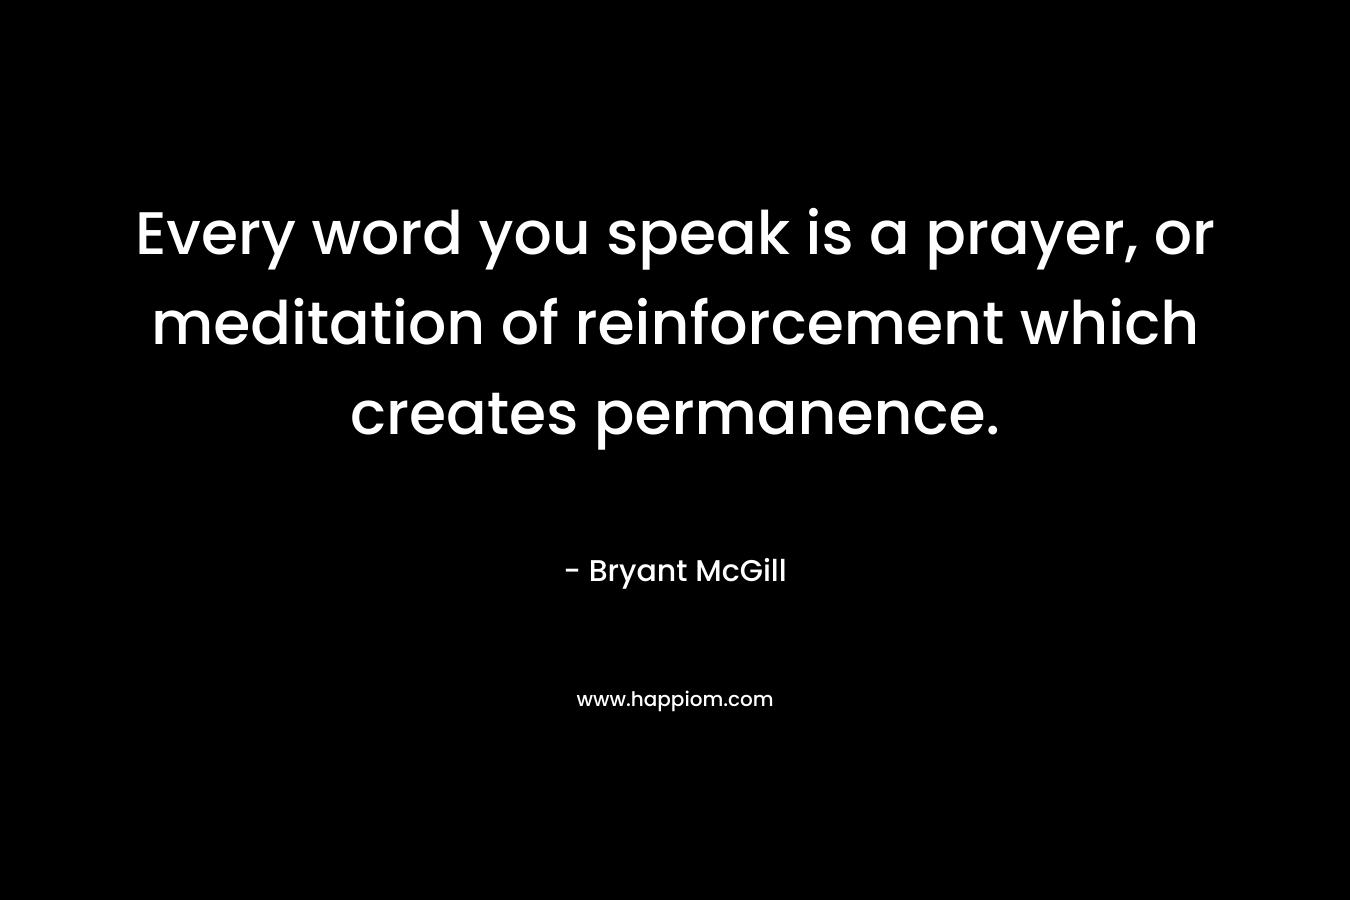 Every word you speak is a prayer, or meditation of reinforcement which creates permanence.